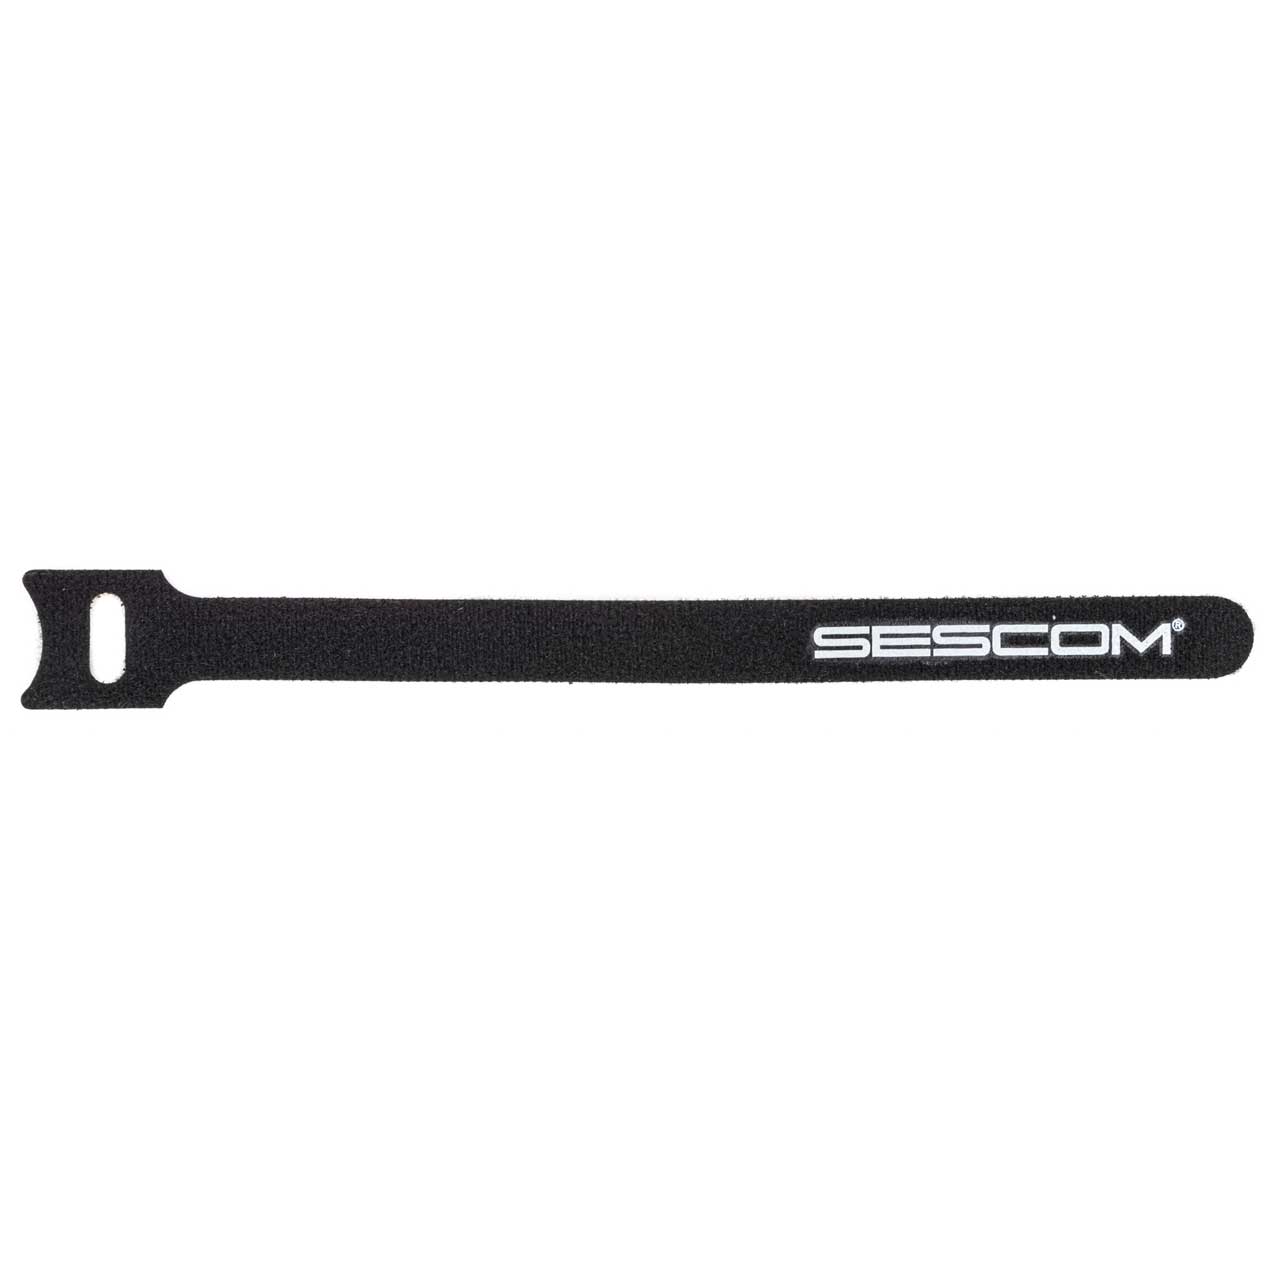 Sescom Hook and Loop Cable Wrap 12mm x 180mm Black with White Logo - 2500 Pack SES-HKNLP-2500PK